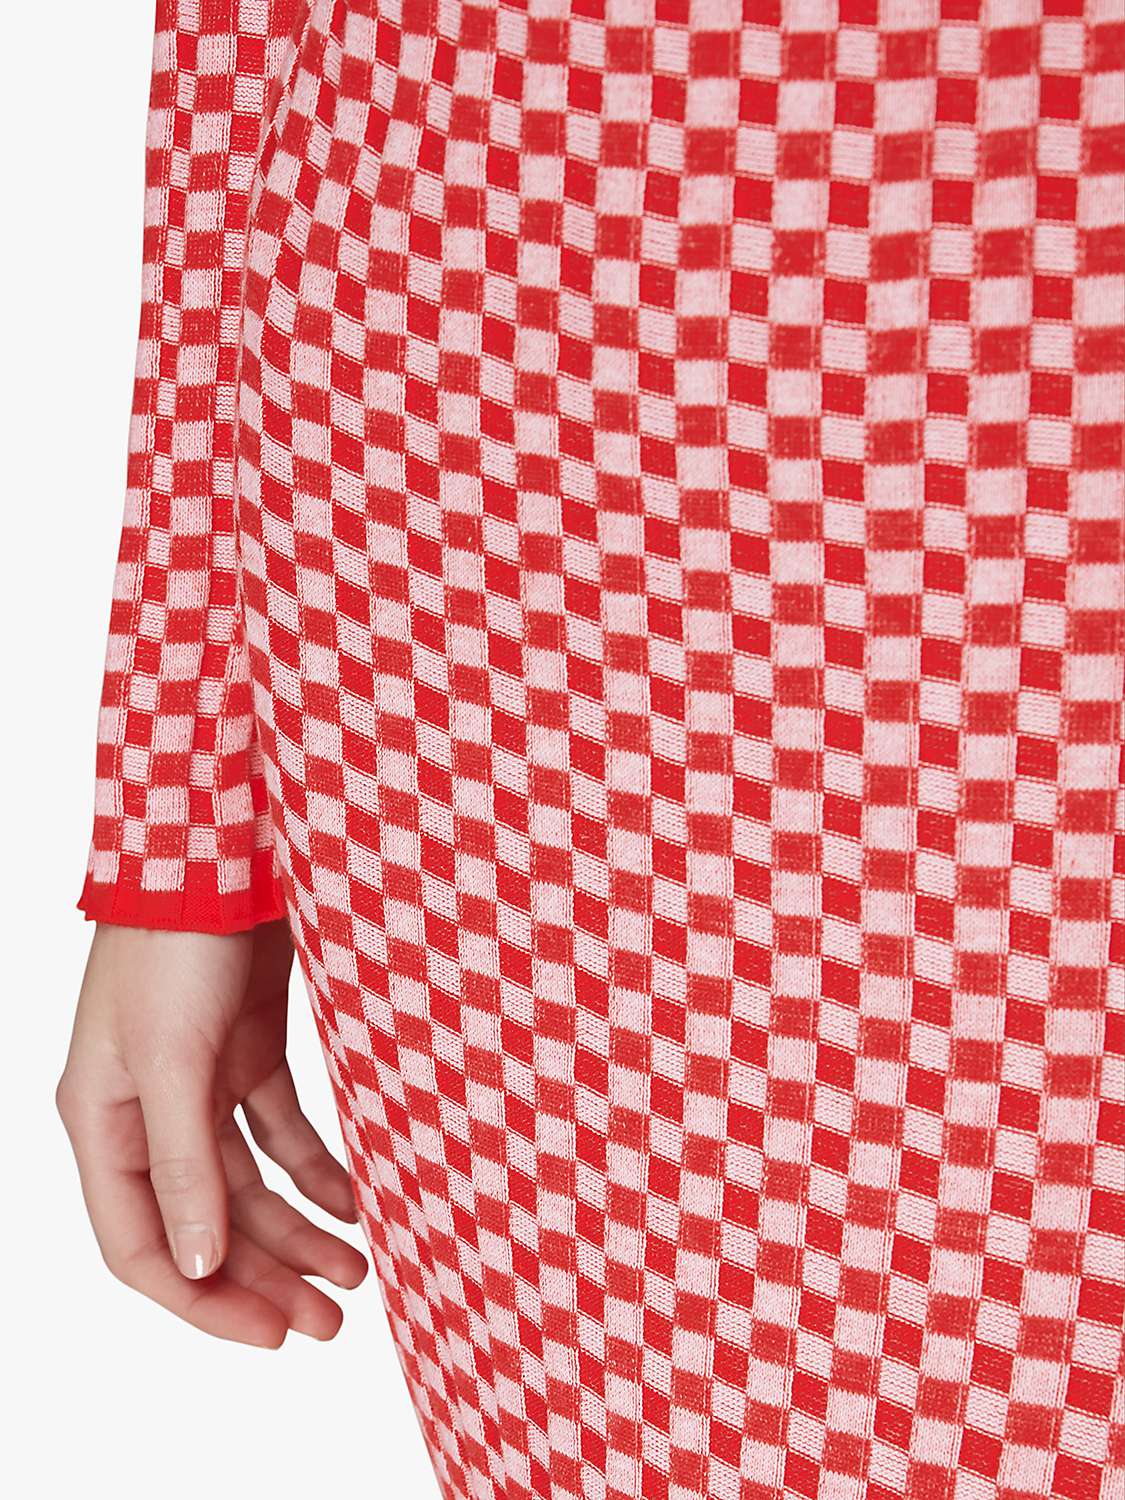 Buy Whistles Checkerboard Knit Midi Dress, Red/White Online at johnlewis.com